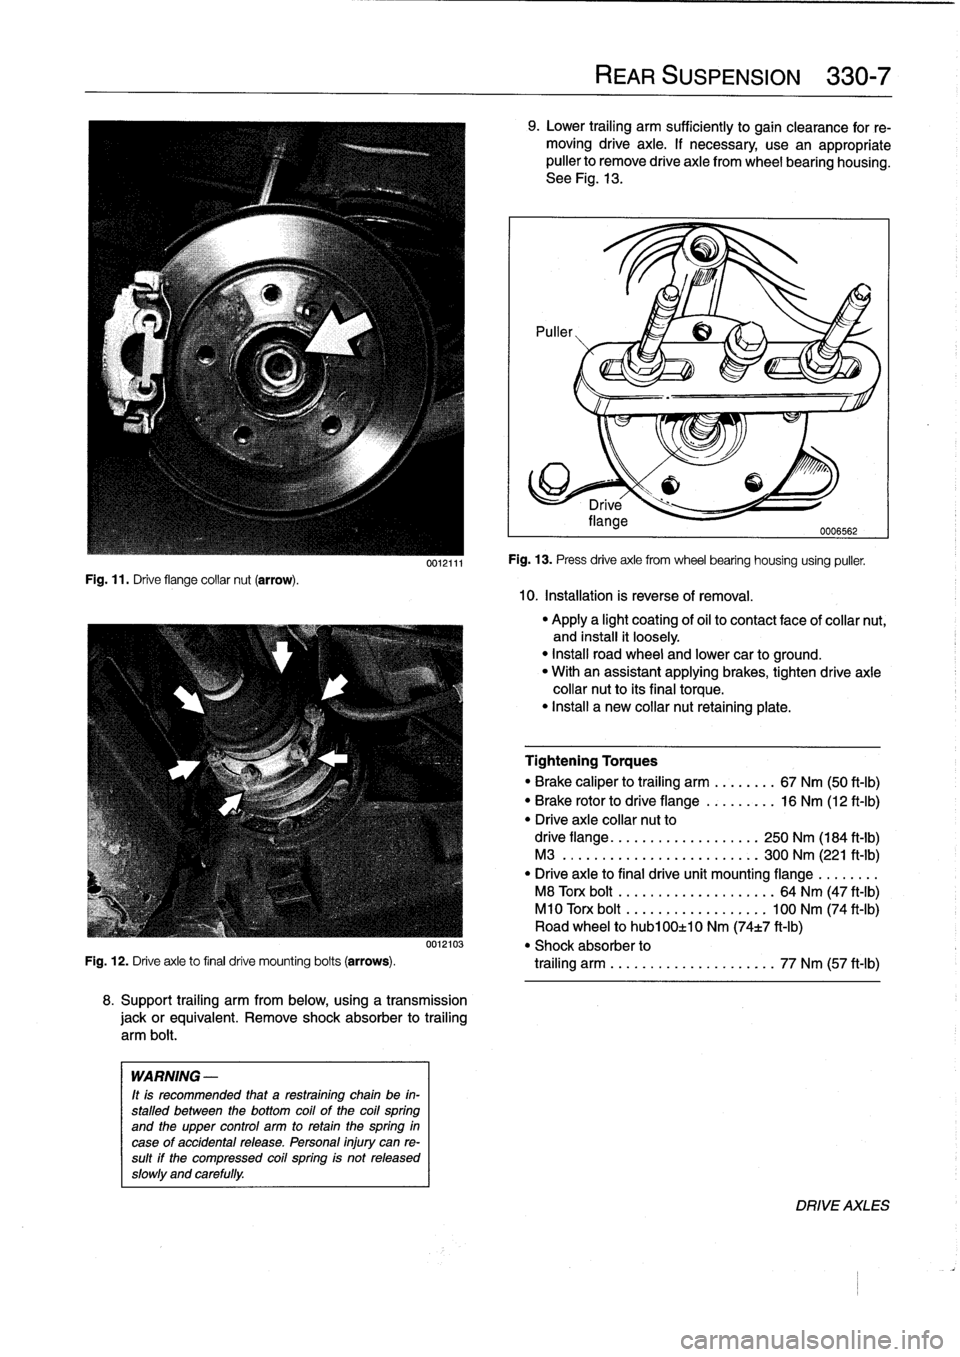 BMW 323i 1993 E36 Owners Manual 
Fig
.
11
.
Drive
flange
collar
nut
(arrow)
.

0012111

8
.
Support
trailing
arm
from
below,
using
a
transmission

jackorequivalent
.
Remove
shock
absorber
to
trailing

arm
bolt
.

WARNING
-

It
is
re